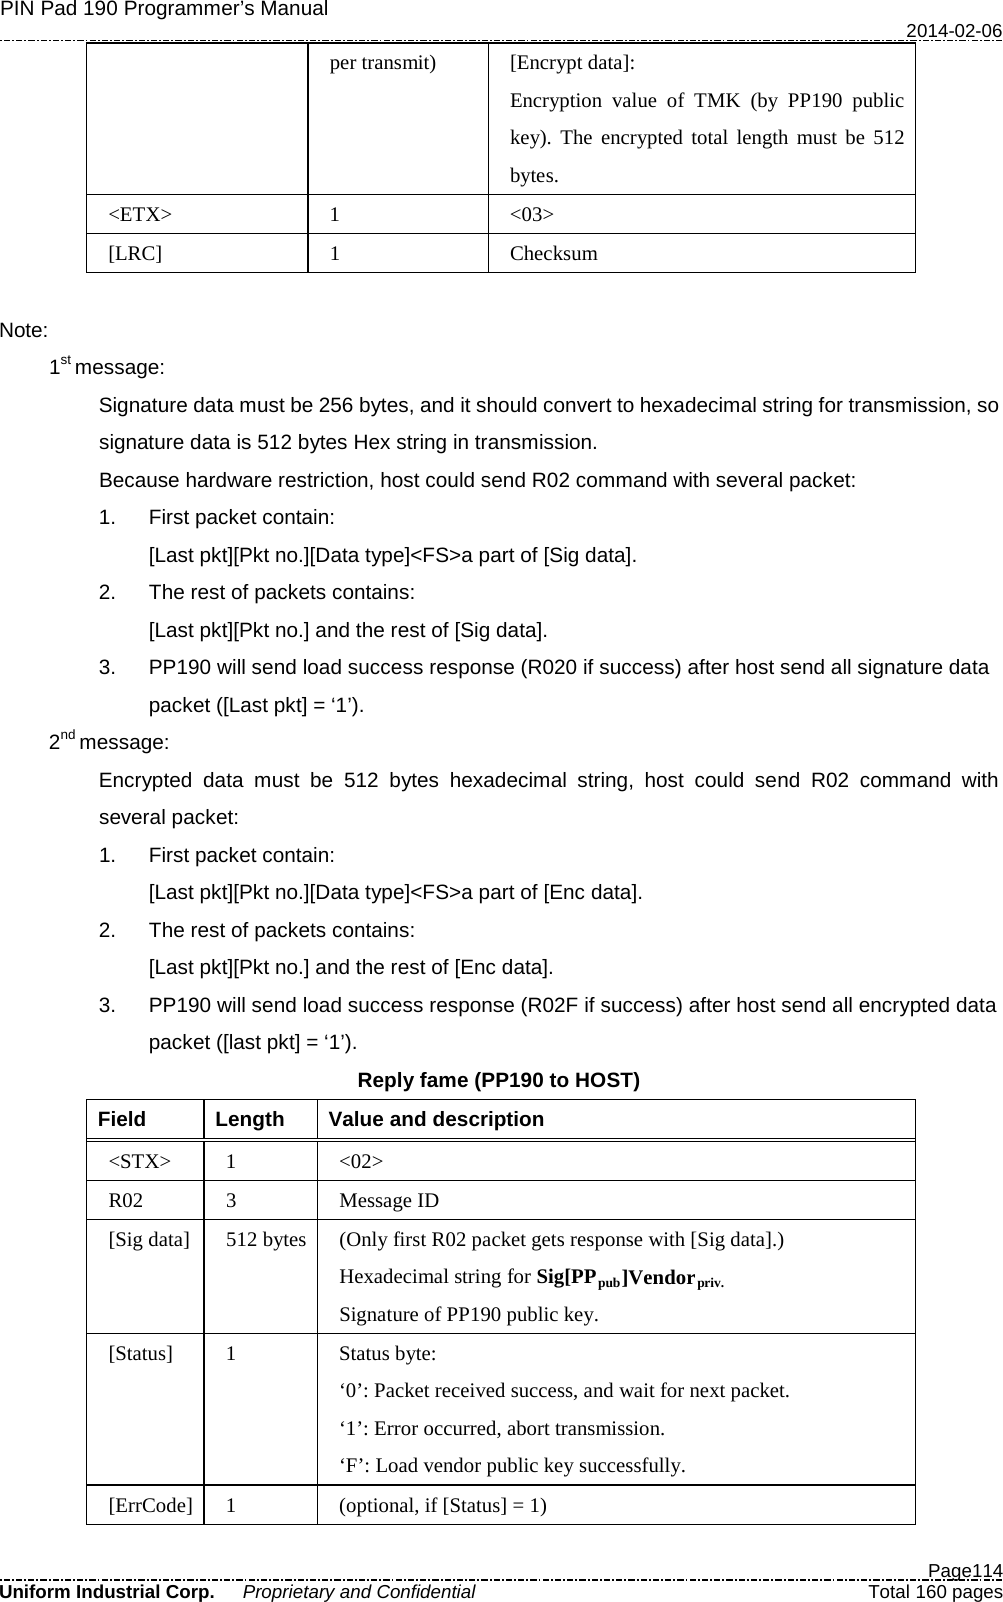 PIN Pad 190 Programmer’s Manual   2014-02-06  Page114 Uniform Industrial Corp. Proprietary and Confidential  Total 160 pages per transmit) [Encrypt data]: Encryption value of TMK (by PP190 public key). The encrypted total length must be 512 bytes. &lt;ETX&gt;  1  &lt;03&gt; [LRC]  1  Checksum  Note:   1st message: Signature data must be 256 bytes, and it should convert to hexadecimal string for transmission, so signature data is 512 bytes Hex string in transmission. Because hardware restriction, host could send R02 command with several packet: 1. First packet contain: [Last pkt][Pkt no.][Data type]&lt;FS&gt;a part of [Sig data]. 2. The rest of packets contains: [Last pkt][Pkt no.] and the rest of [Sig data]. 3. PP190 will send load success response (R020 if success) after host send all signature data packet ([Last pkt] = ‘1’).   2nd message: Encrypted data must be  512 bytes hexadecimal string, host could send  R02  command with several packet: 1. First packet contain: [Last pkt][Pkt no.][Data type]&lt;FS&gt;a part of [Enc data]. 2. The rest of packets contains: [Last pkt][Pkt no.] and the rest of [Enc data]. 3. PP190 will send load success response (R02F if success) after host send all encrypted data packet ([last pkt] = ‘1’). Reply fame (PP190 to HOST) Field  Length  Value and description &lt;STX&gt;  1  &lt;02&gt; R02  3  Message ID [Sig data] 512 bytes  (Only first R02 packet gets response with [Sig data].) Hexadecimal string for Sig[PPpub]Vendorpriv. Signature of PP190 public key. [Status]  1  Status byte: ‘0’: Packet received success, and wait for next packet. ‘1’: Error occurred, abort transmission. ‘F’: Load vendor public key successfully. [ErrCode]  1  (optional, if [Status] = 1) 